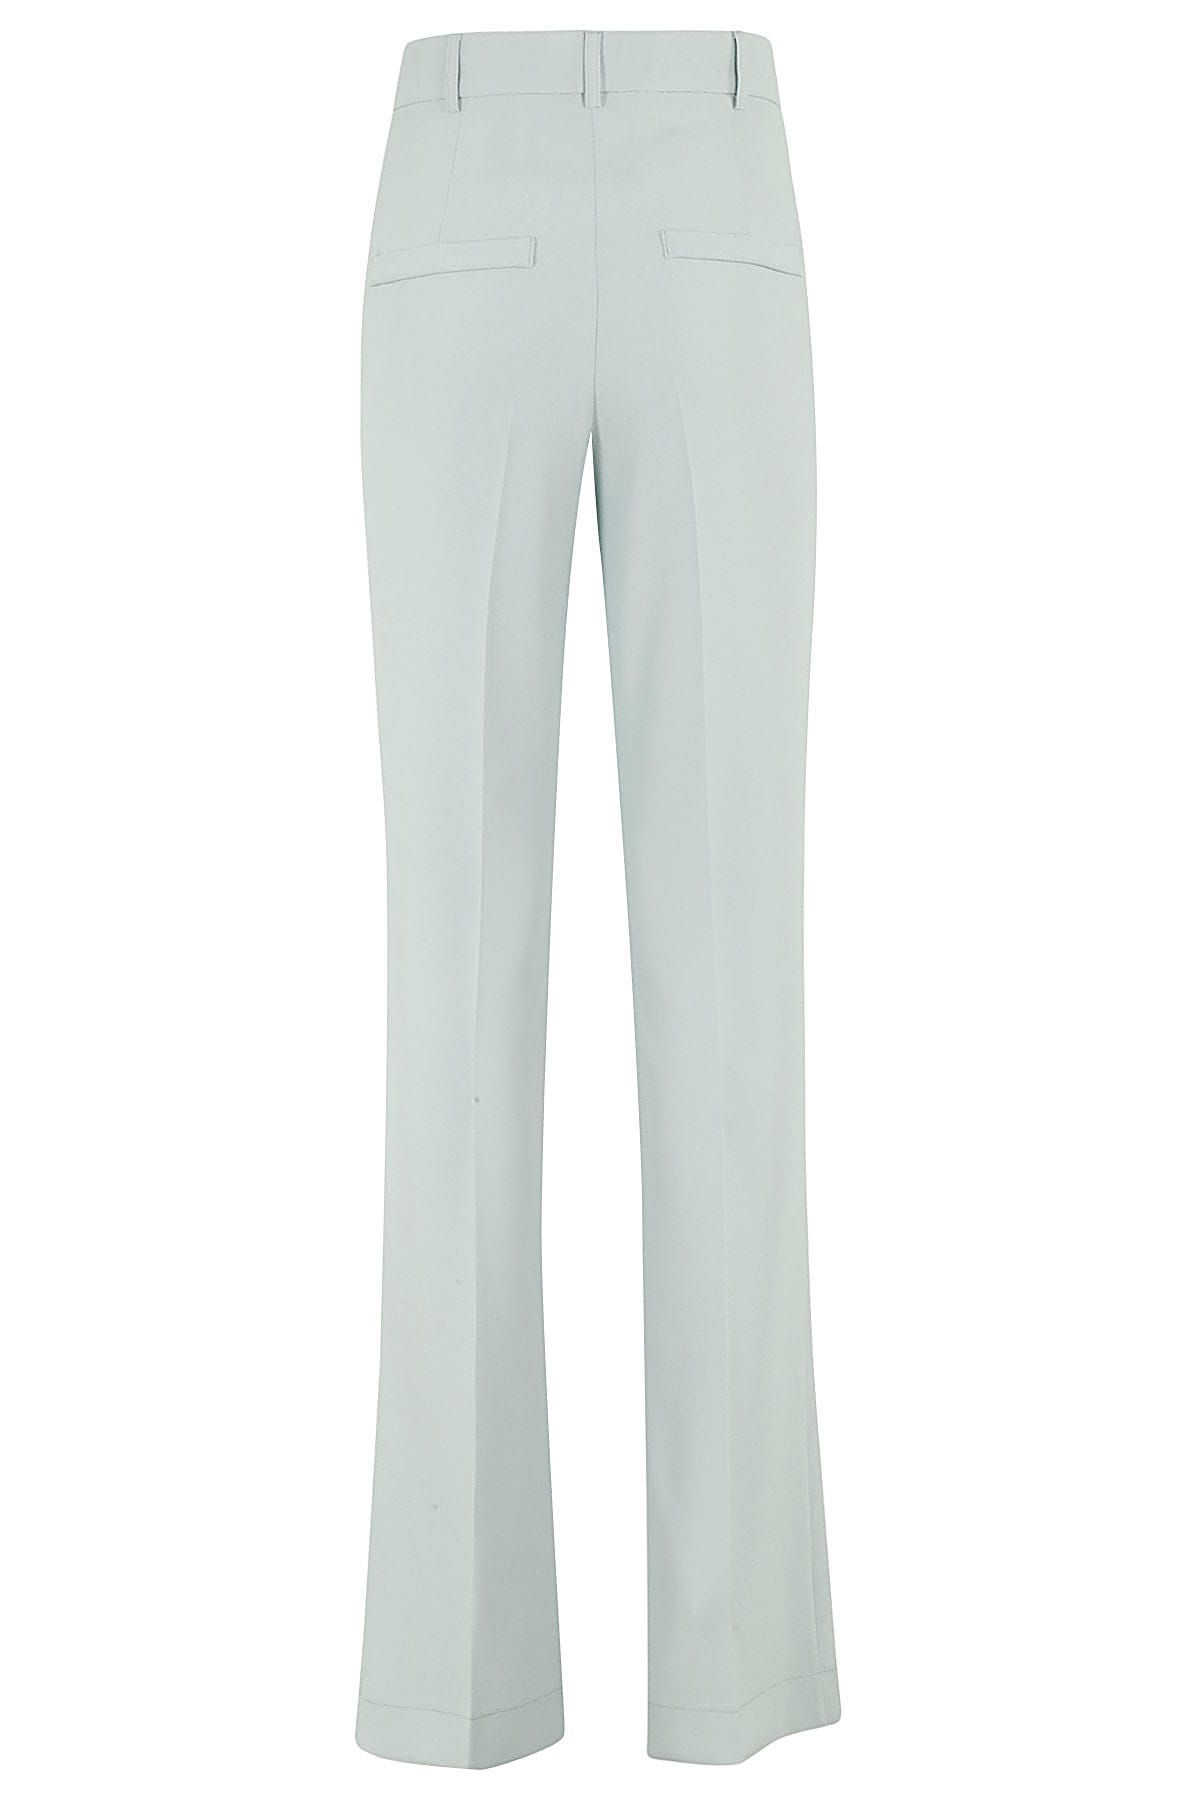 Shop Hebe Studio The Georgia Pant Cady In Teal